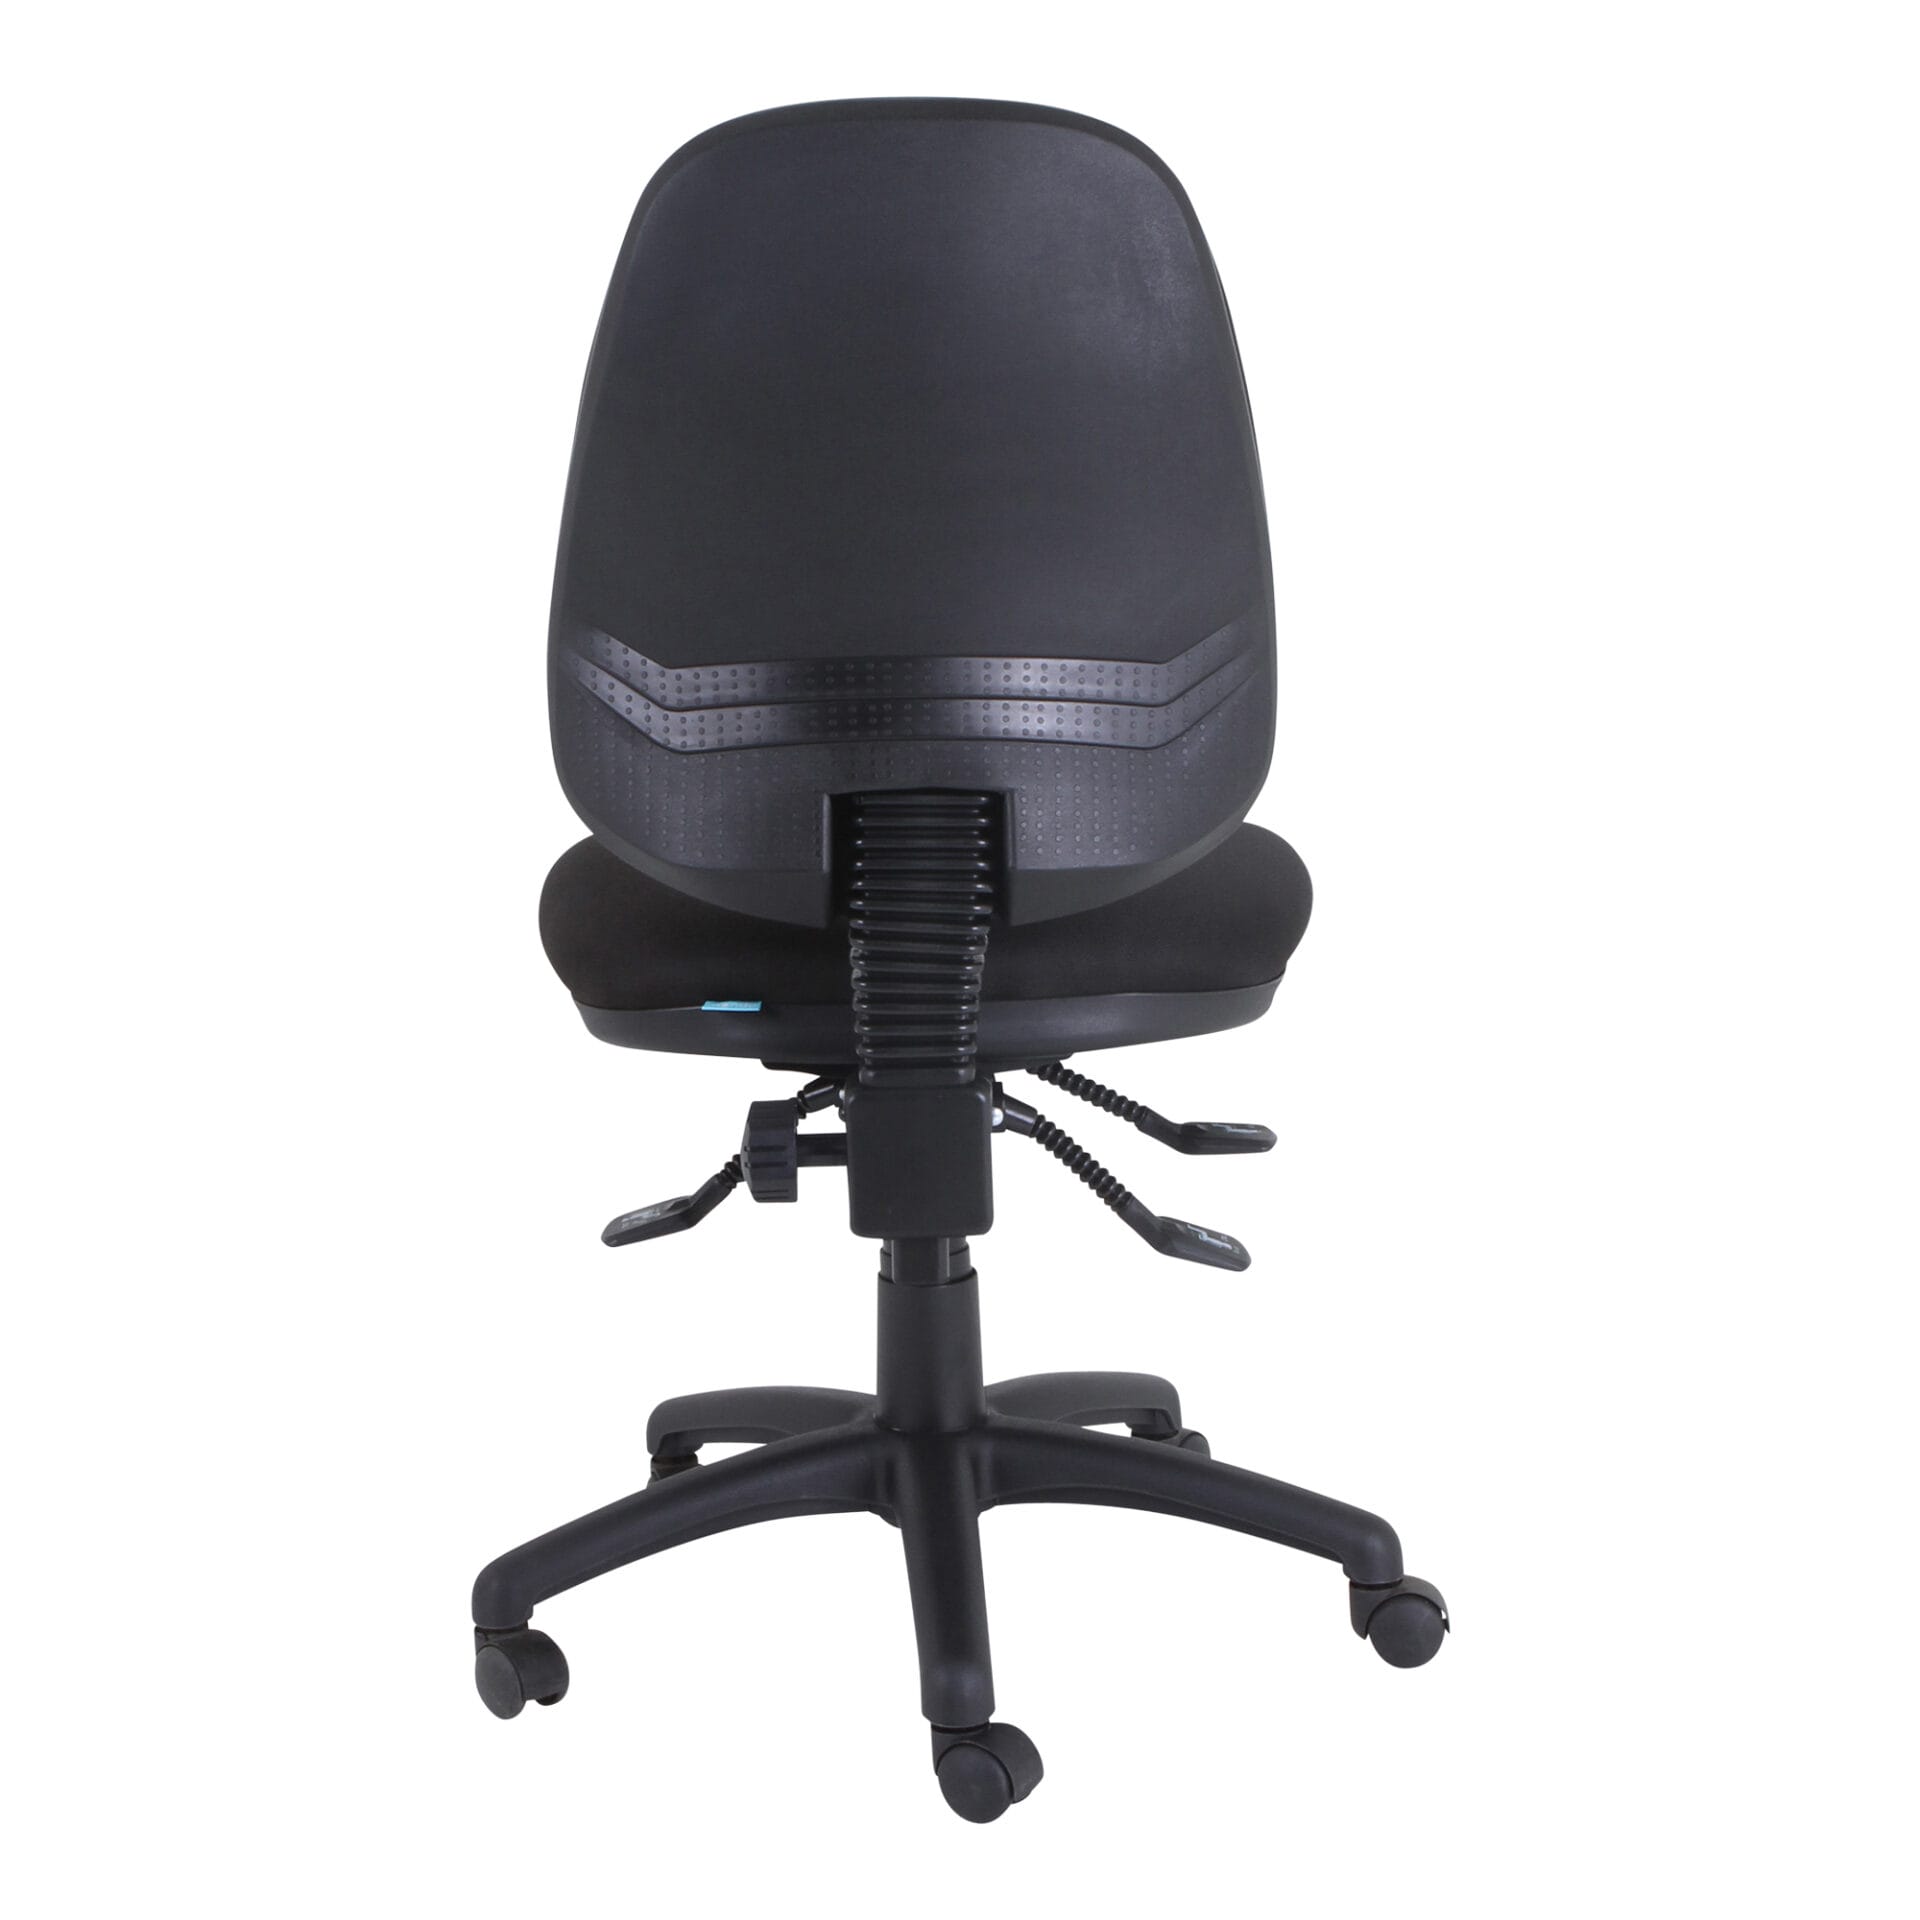 Back view of Mondo Java High Back task chair